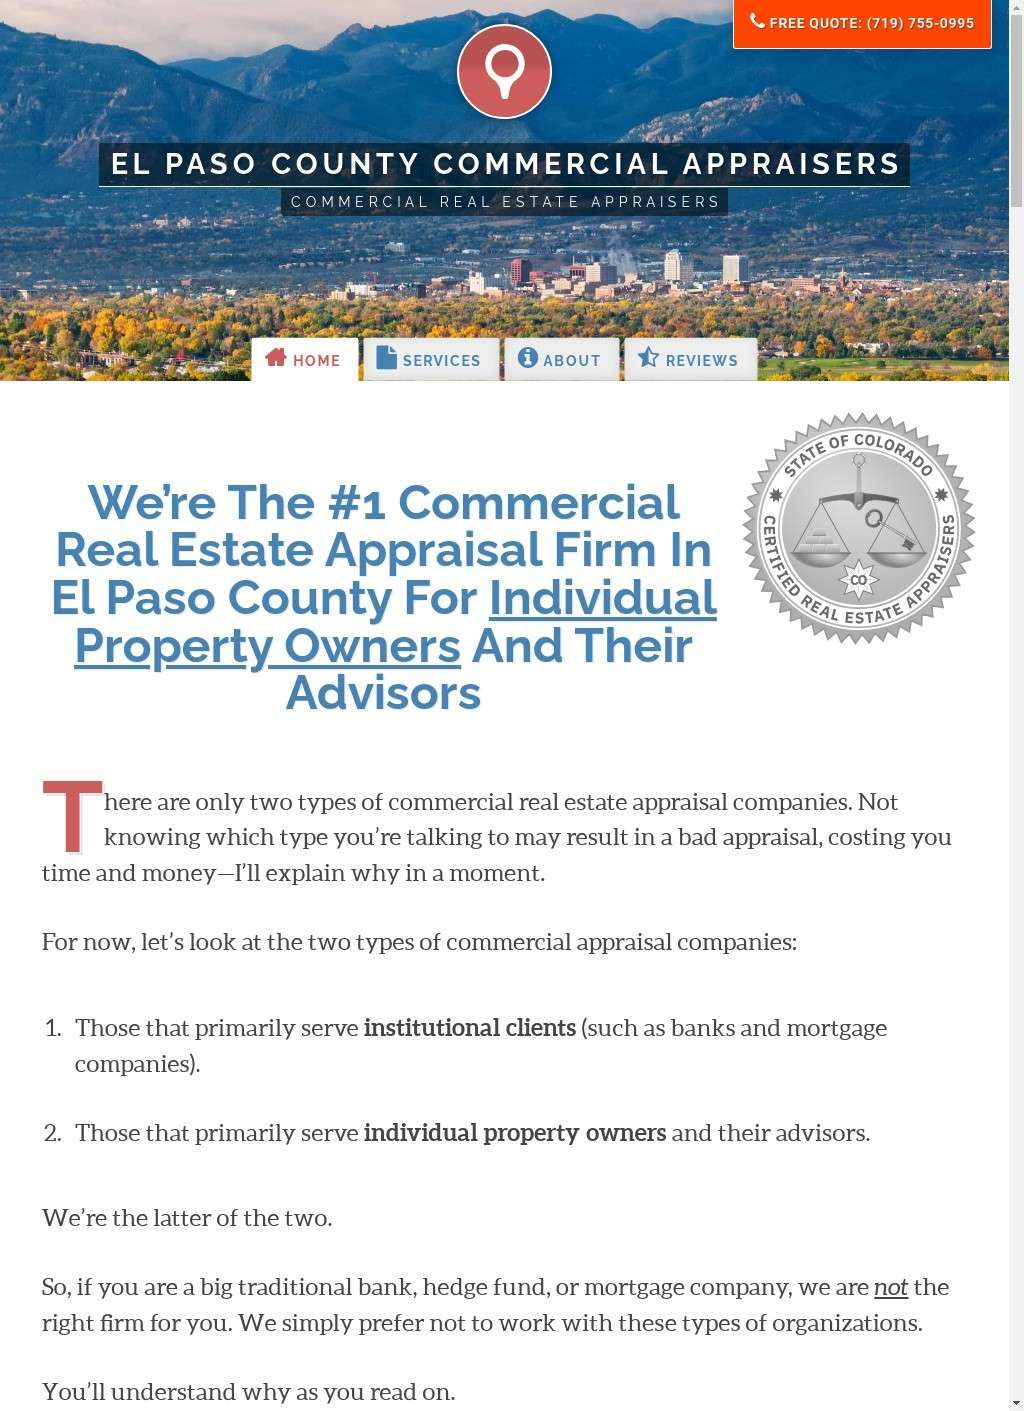 Appraisers of El Paso Commercial Property